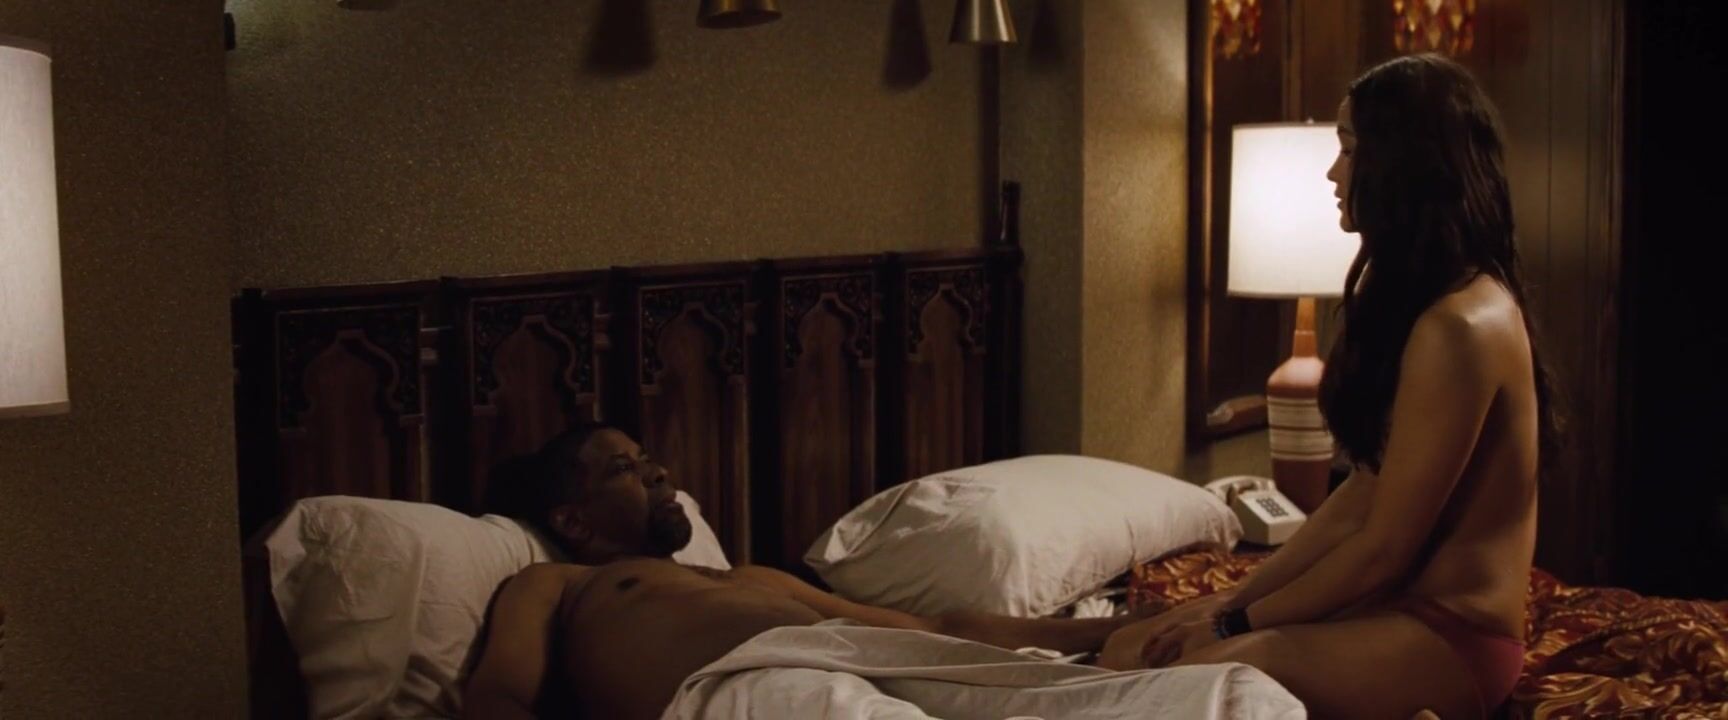 Stepmother Paula Patton manages to excite black man during the naked moment from 2 Guns movie Amateur Sex Tapes - 2